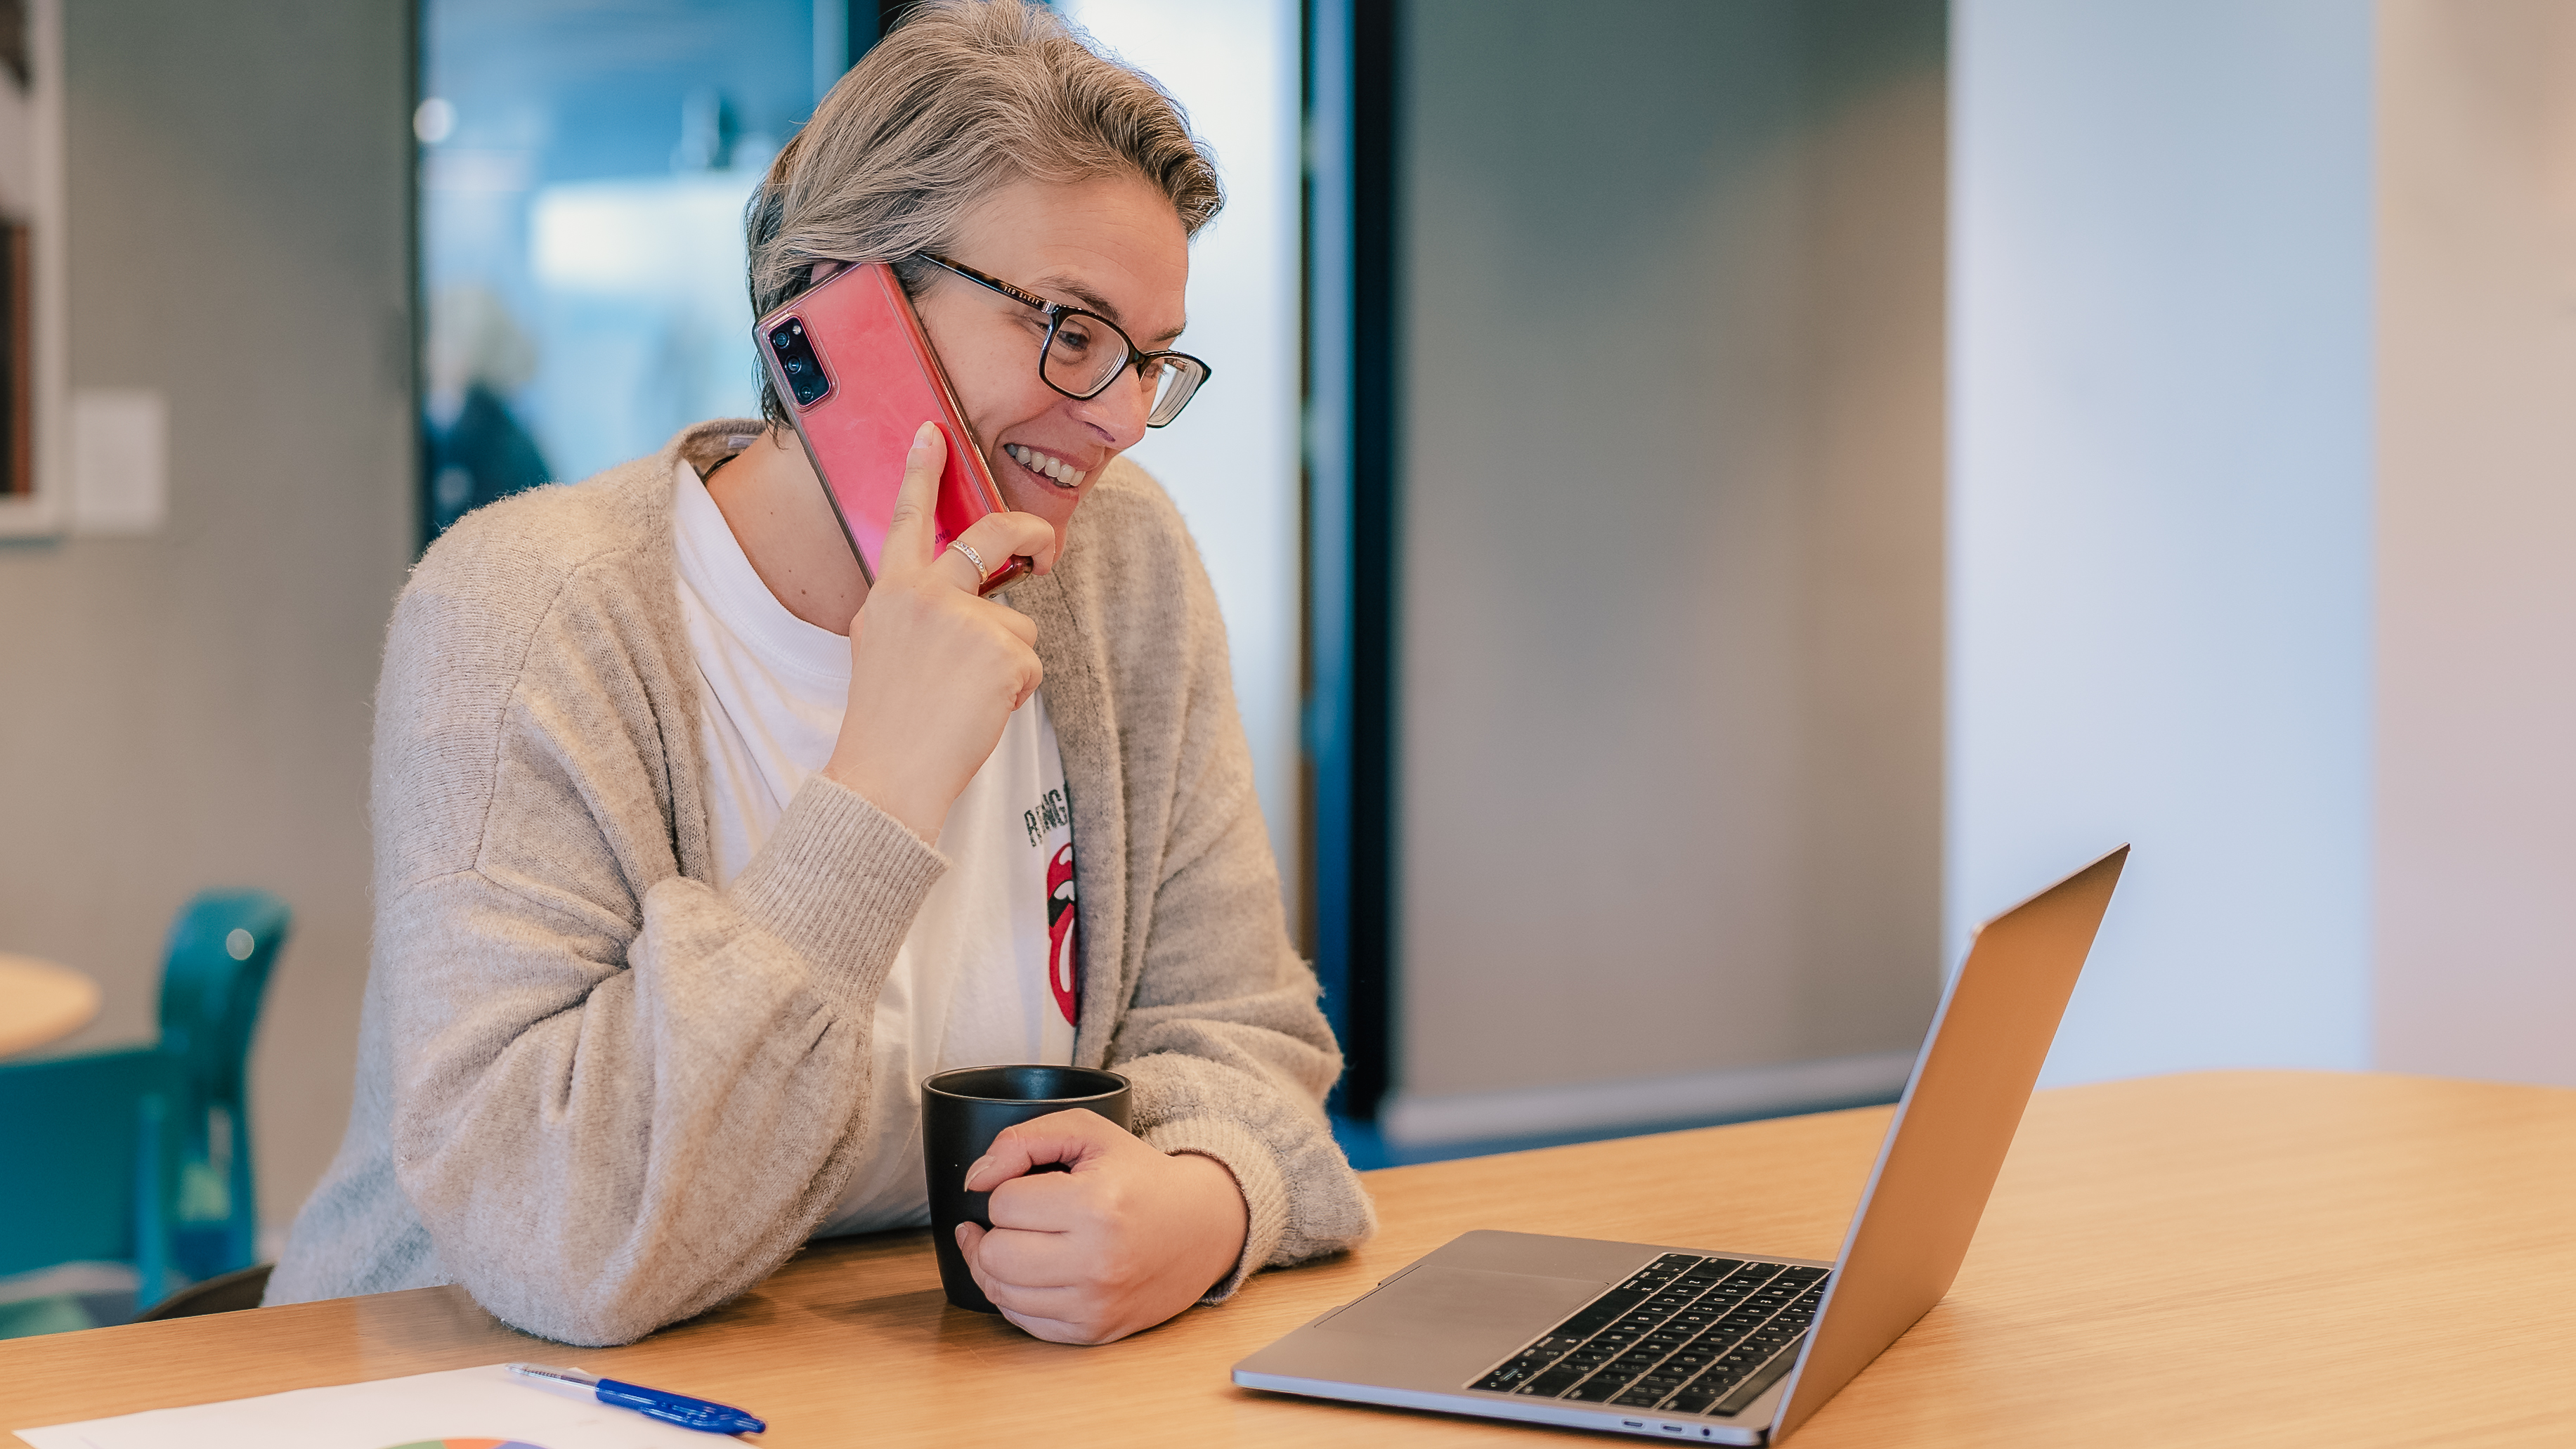 Smiling woman on the phone with laptop